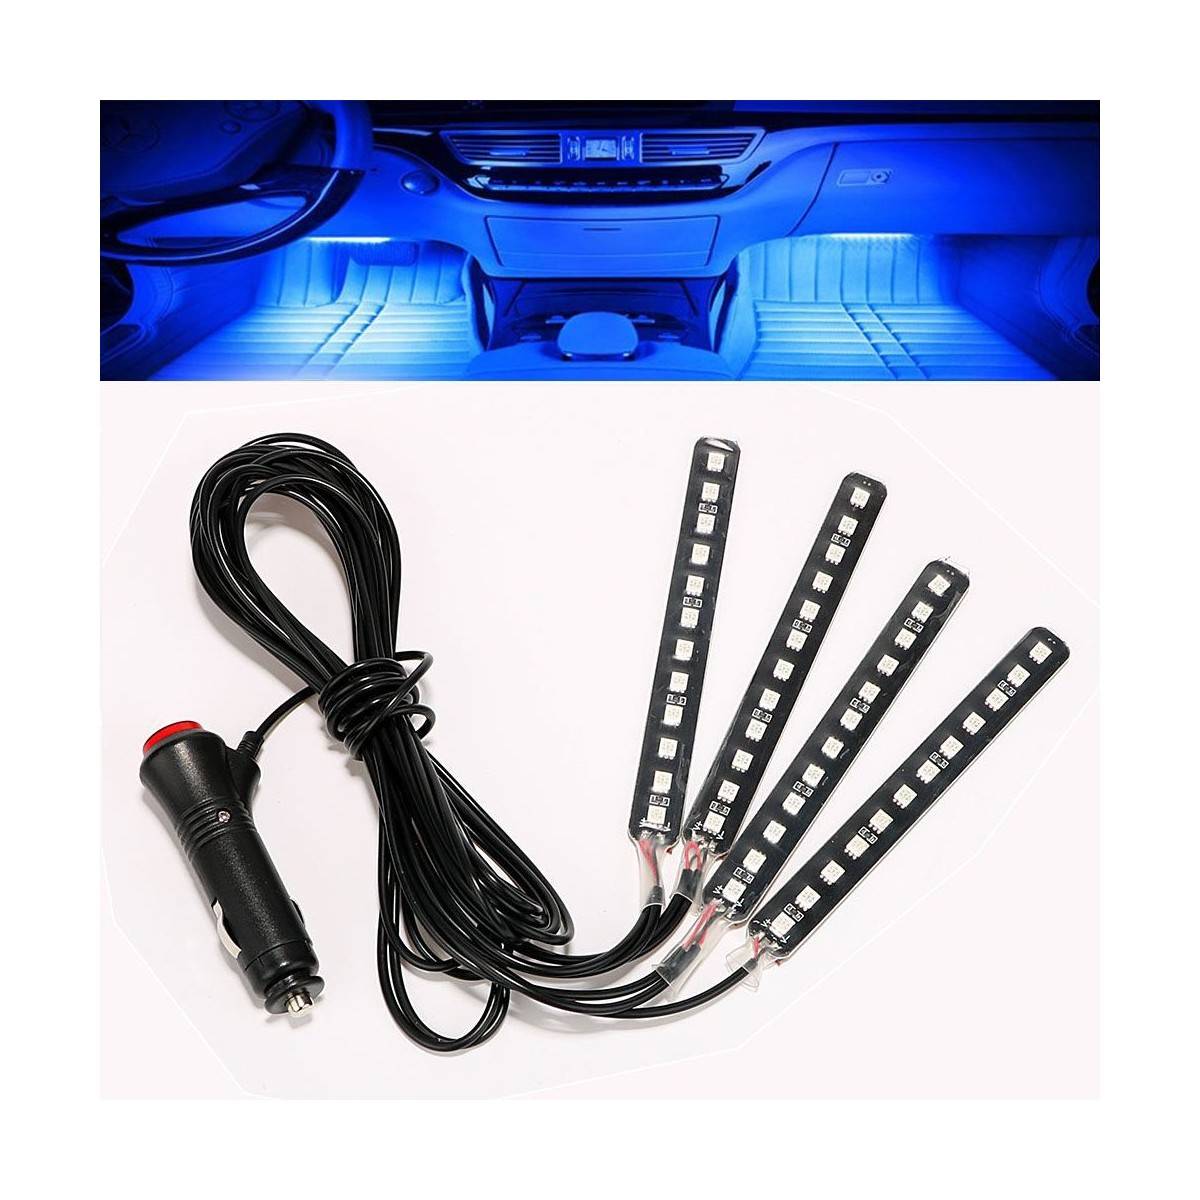 Car LED kit for RGB 12V with IR remote control